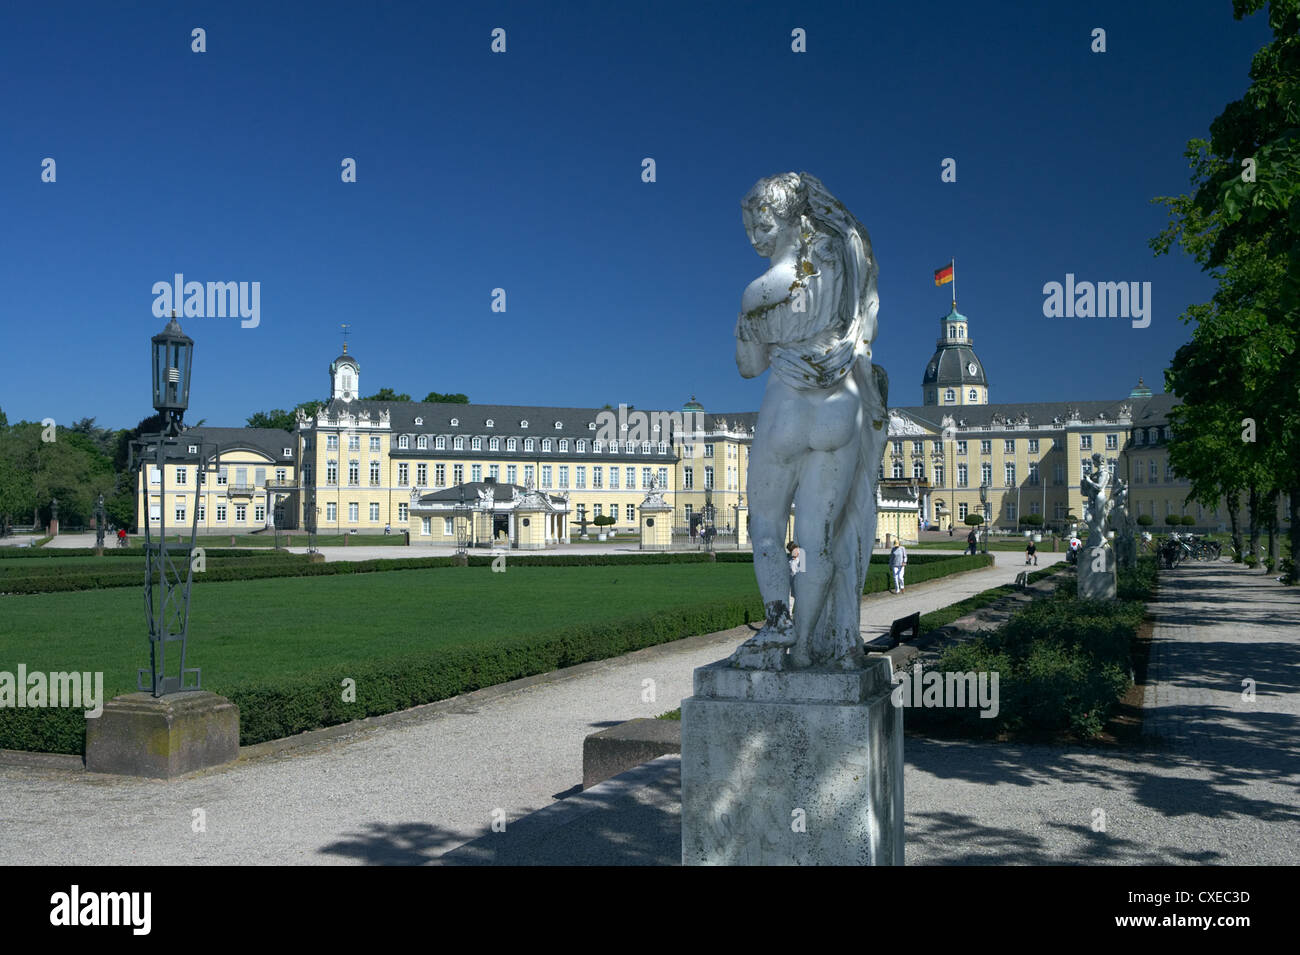 Karlsruhe - The baroque palace with park Stock Photo